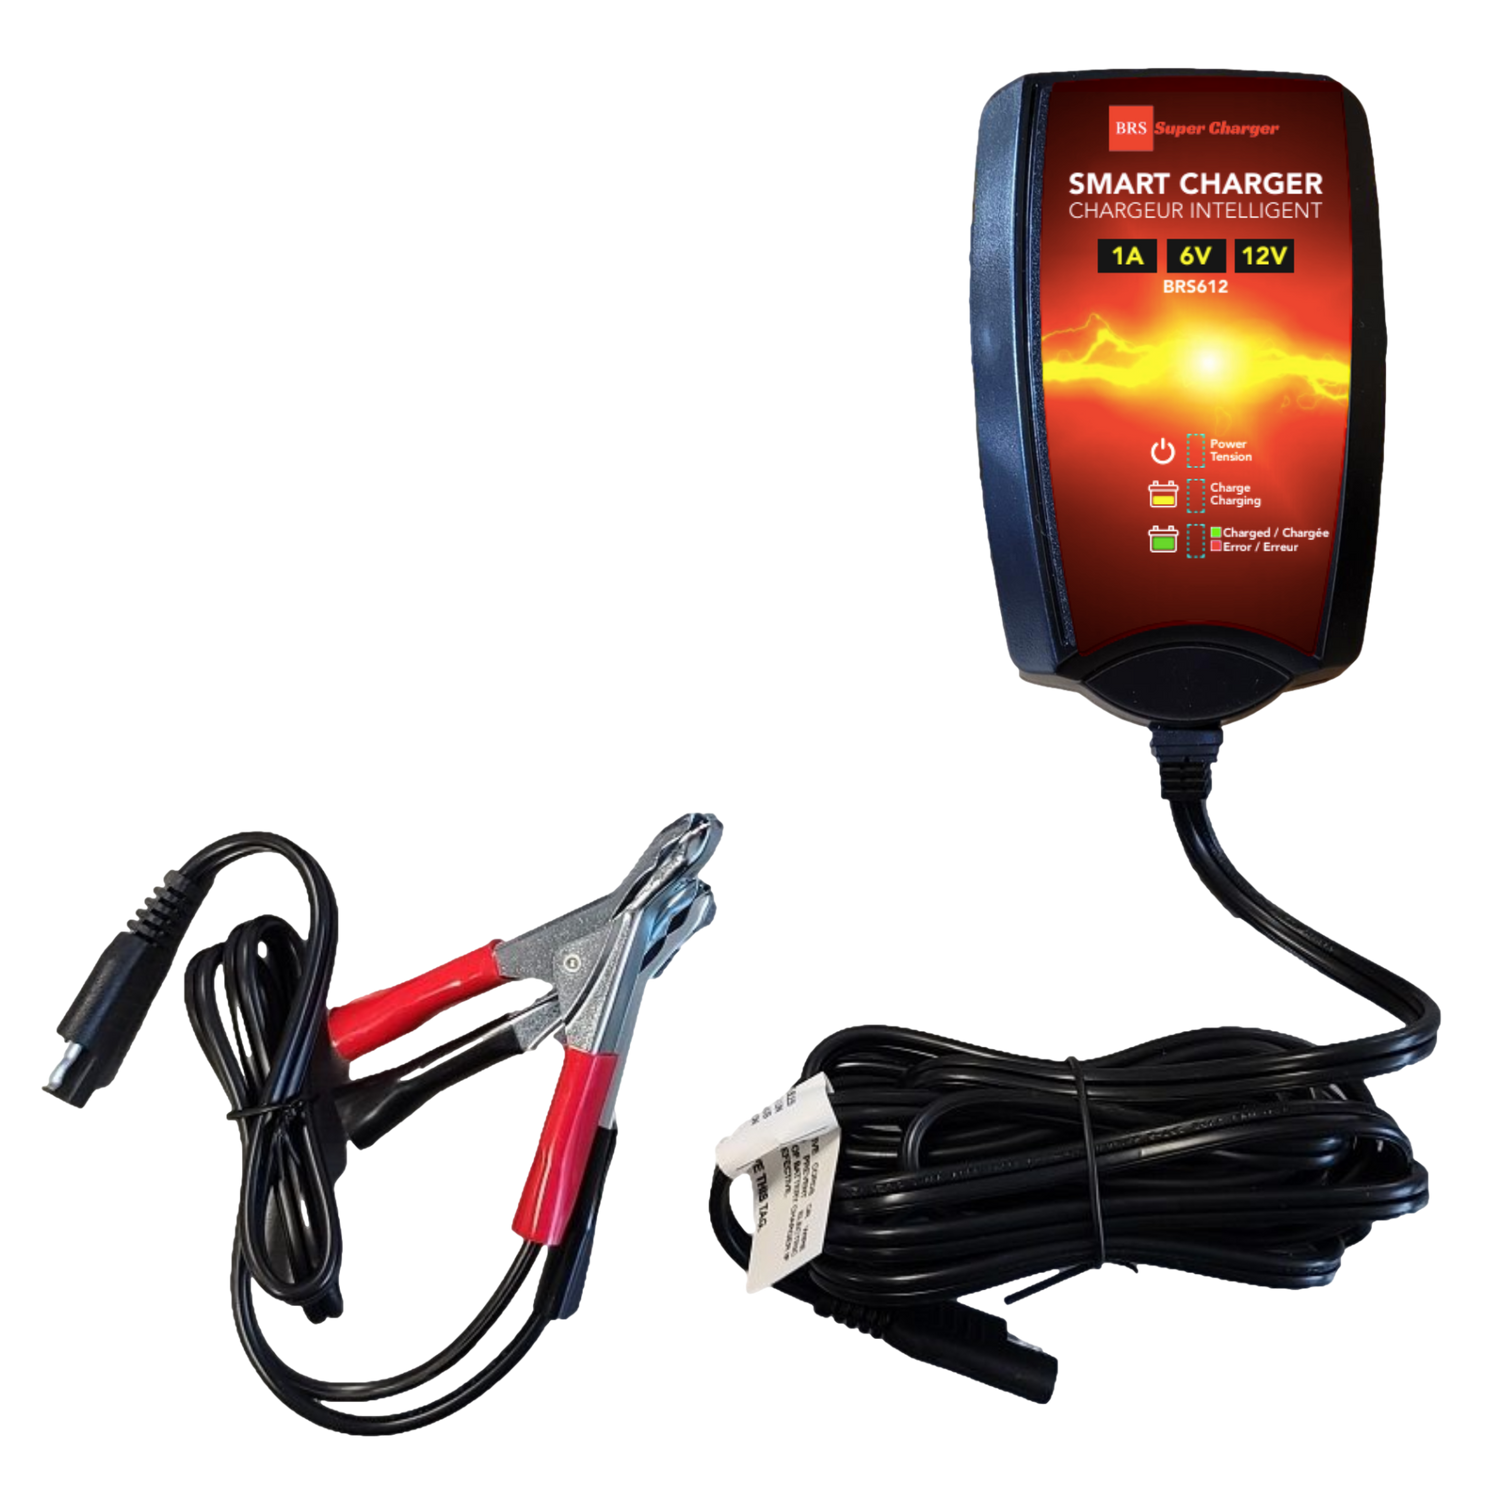 BRS5L-BS BS 30 Day Warranty Battery & Smart Charger / Maintainer Combo Bundle Kit - BRS Super Battery